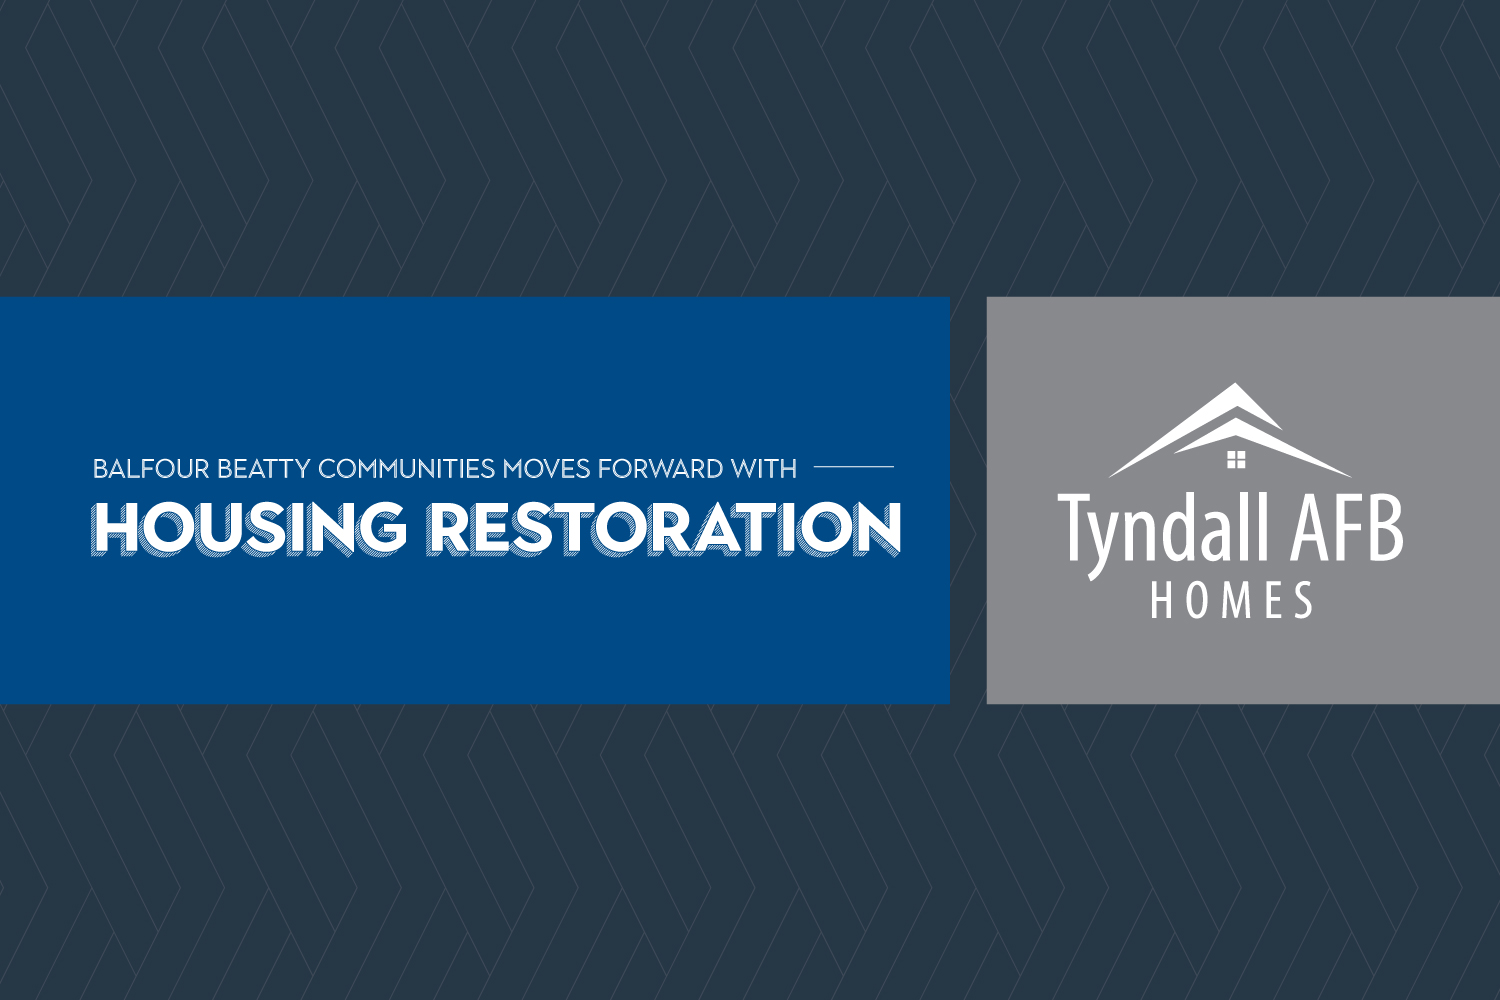 Balfour Beatty Communities moves forward with housing restoration at Tyndall Air Force Base inviting local contractors to submit bids and visit site